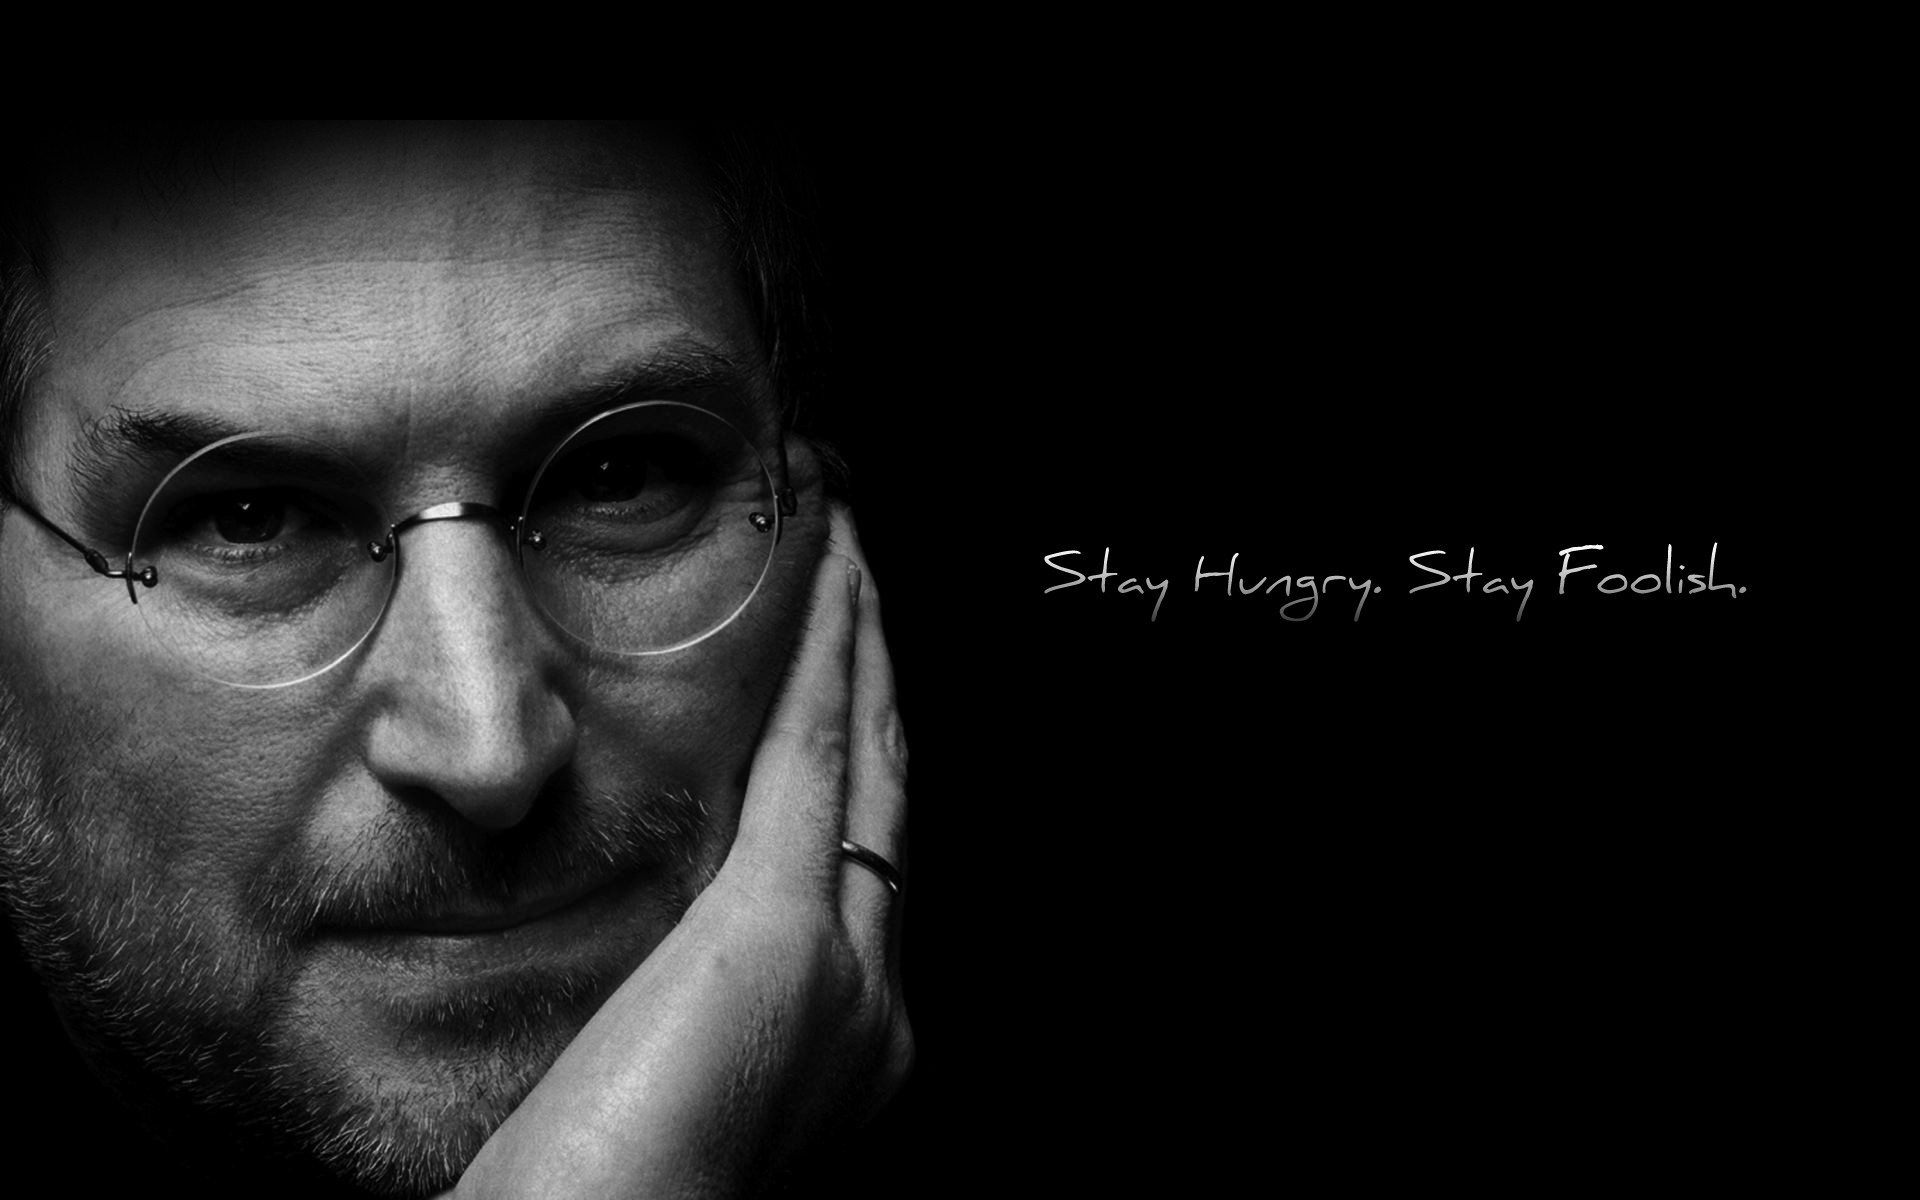 scientists portrait man adult monochrome dark face one studio fine-looking desktop eyewear model person guy serious fashion eye quote life quote background